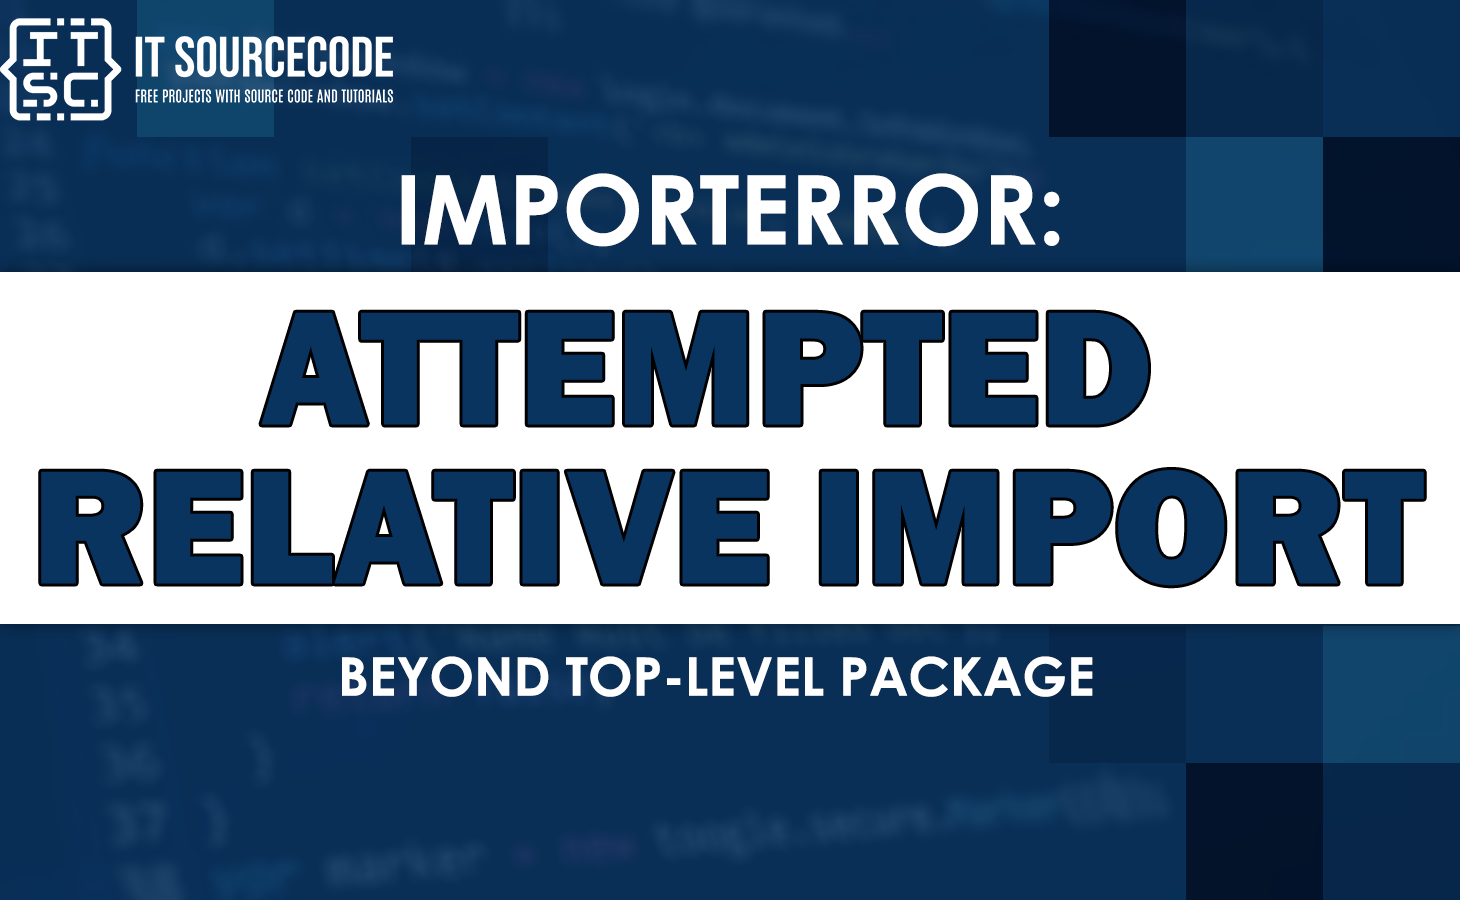 Importerror: Attempted Relative Import Beyond Top-Level Package